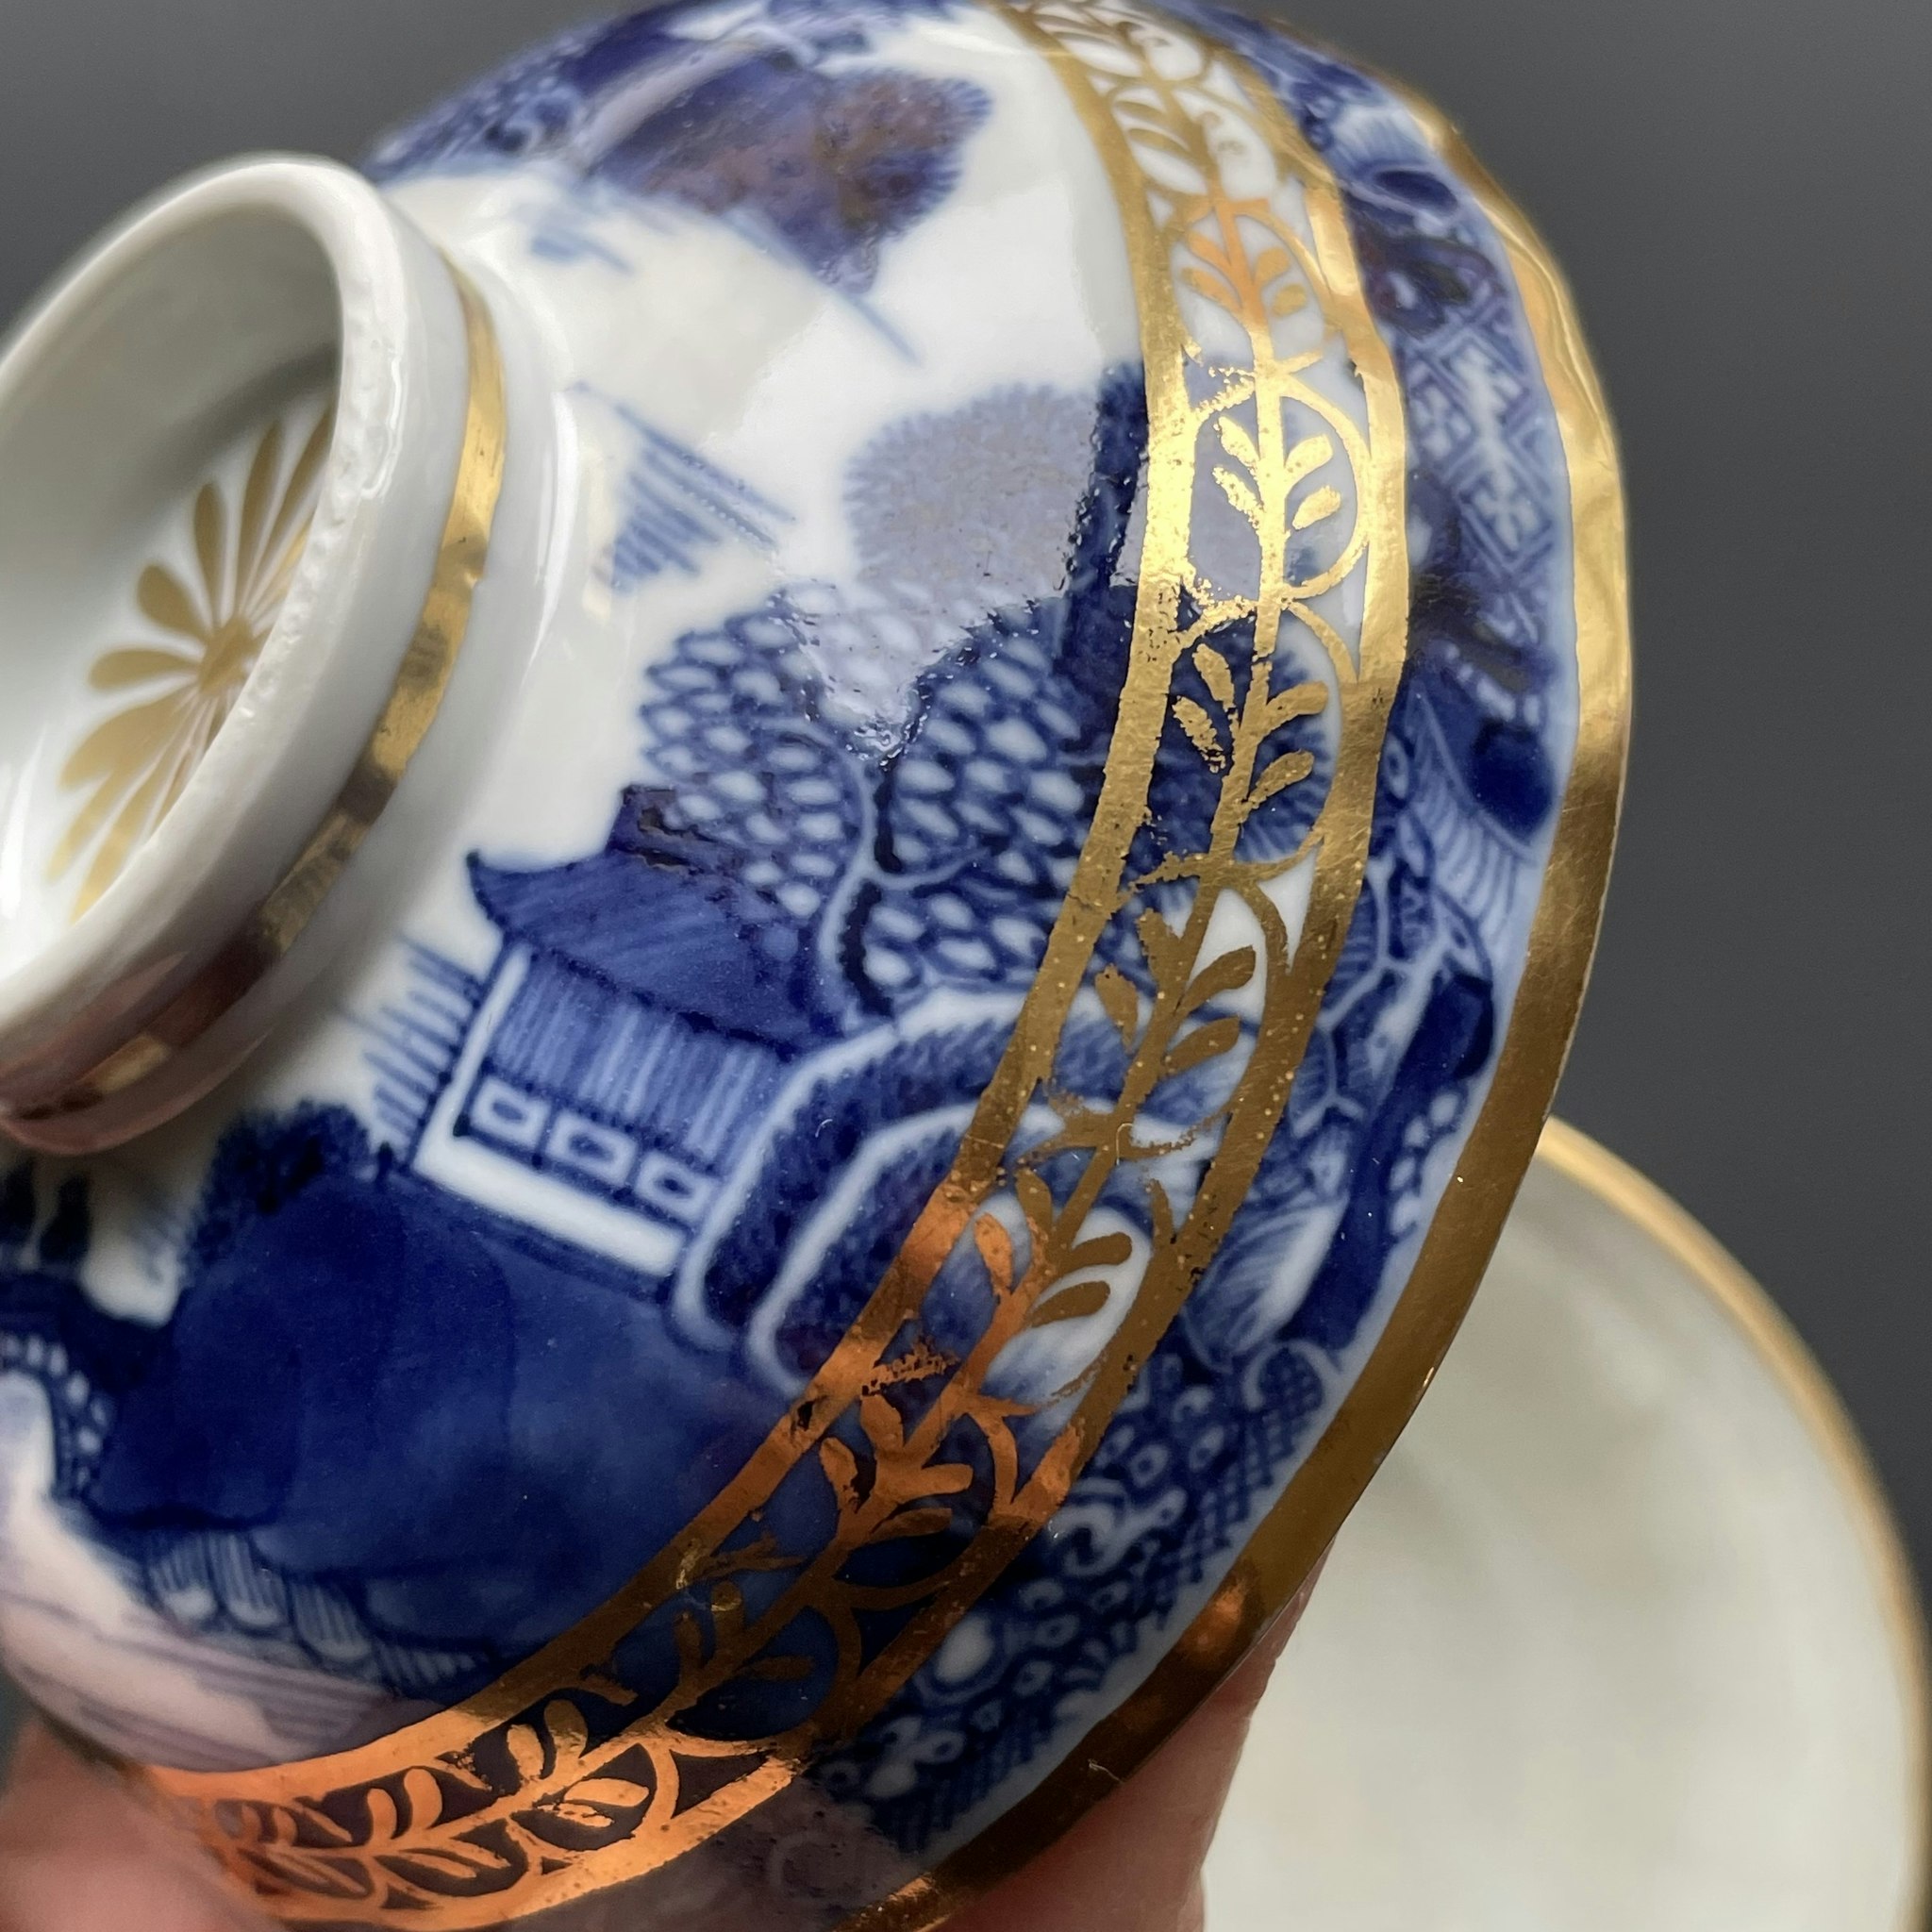 Antique Chinese blue and white tea bowl with lid / Gaiwan with Gilt clobbering 18th / 19th c #1346